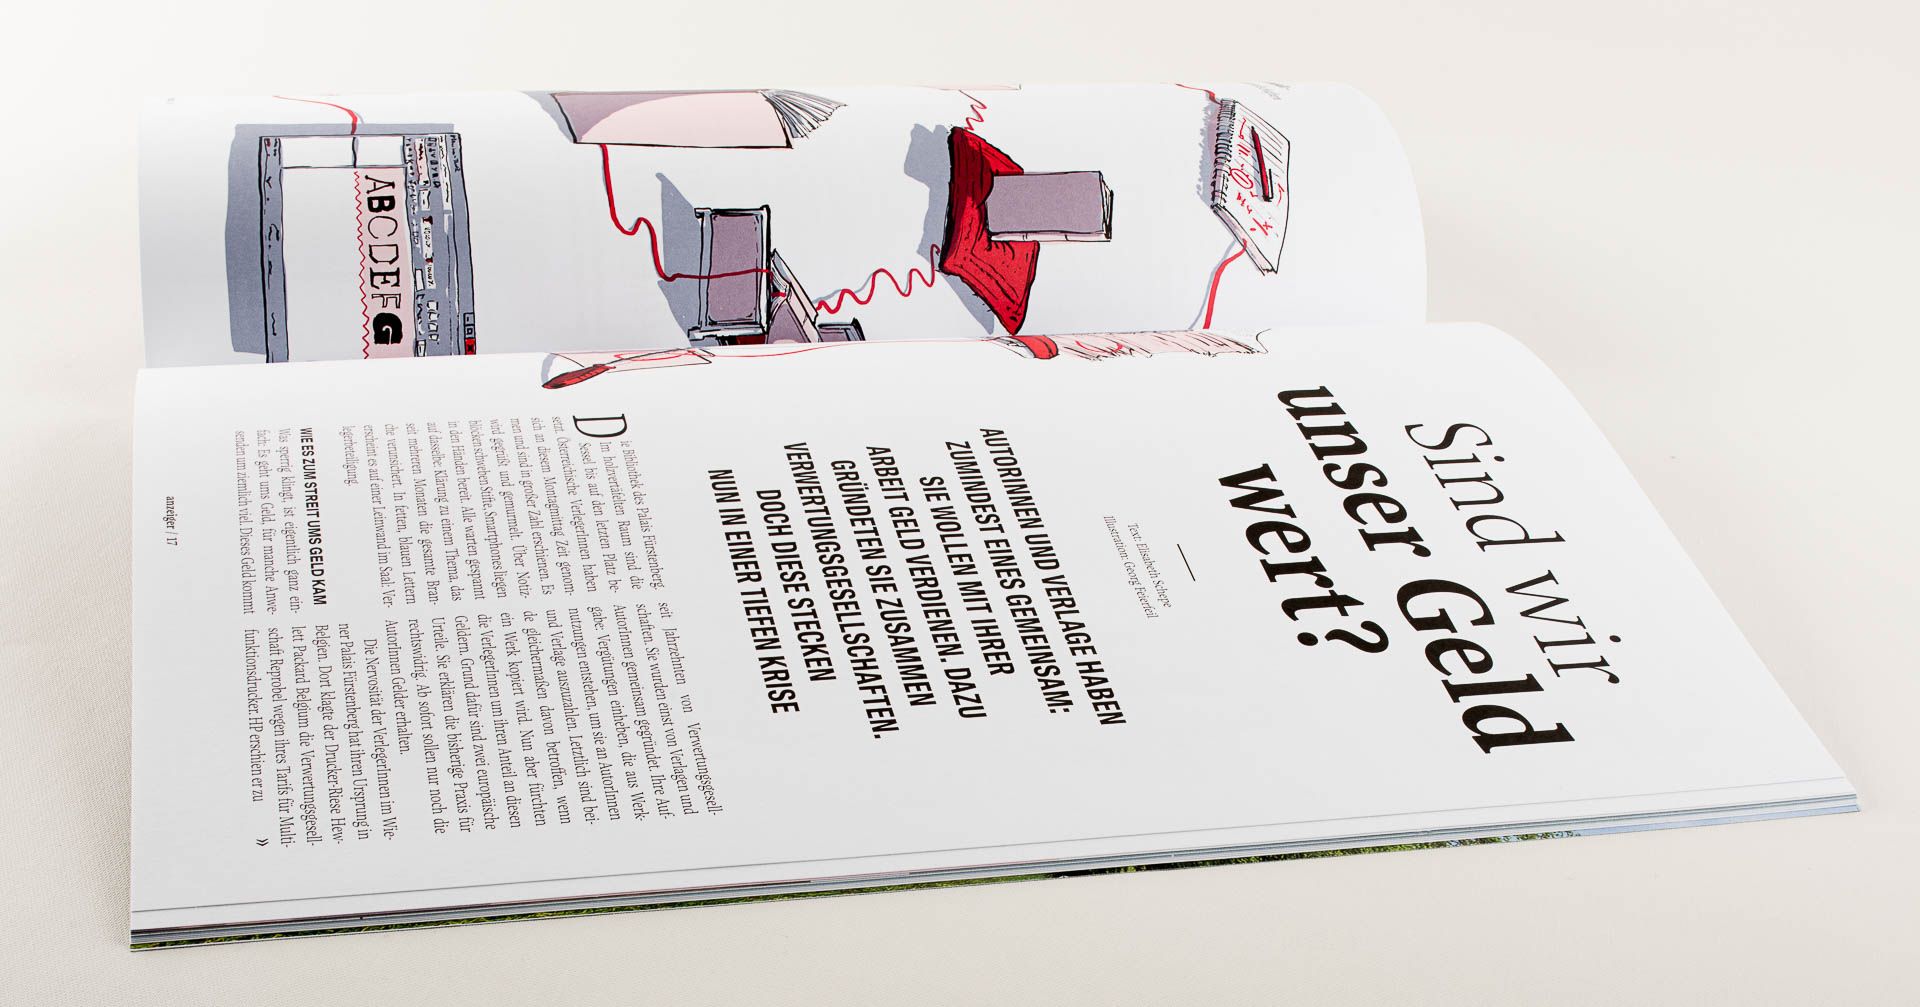 Magazin Anzeiger Font in use Liber Type Foundry